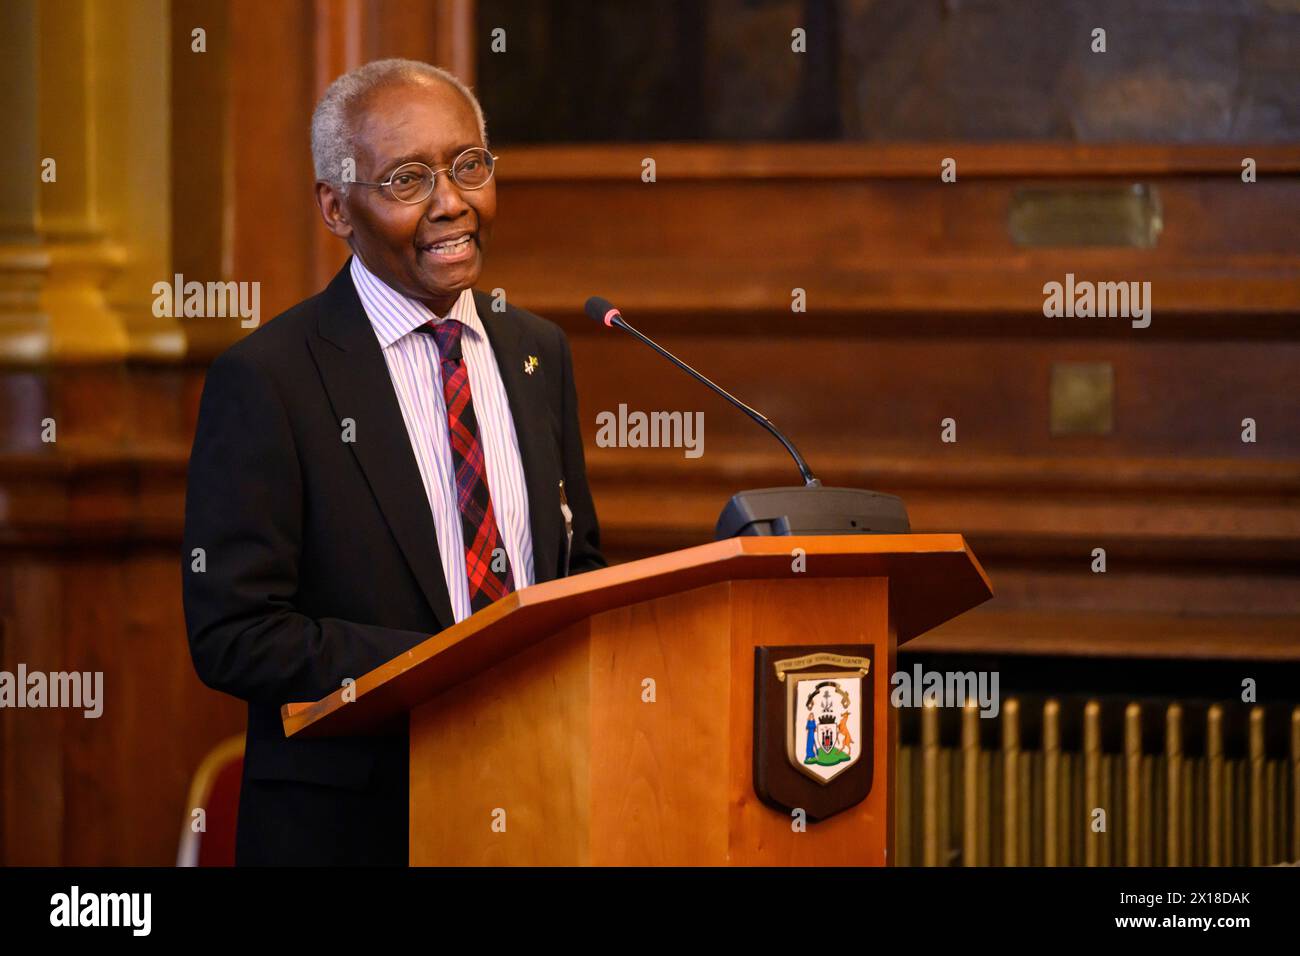 UNESCO International Day fro the Remembrance of the Slave Trade and its Abolition at Edinburgh City Chambers  Professor Sir Geoff Palmer Stock Photo